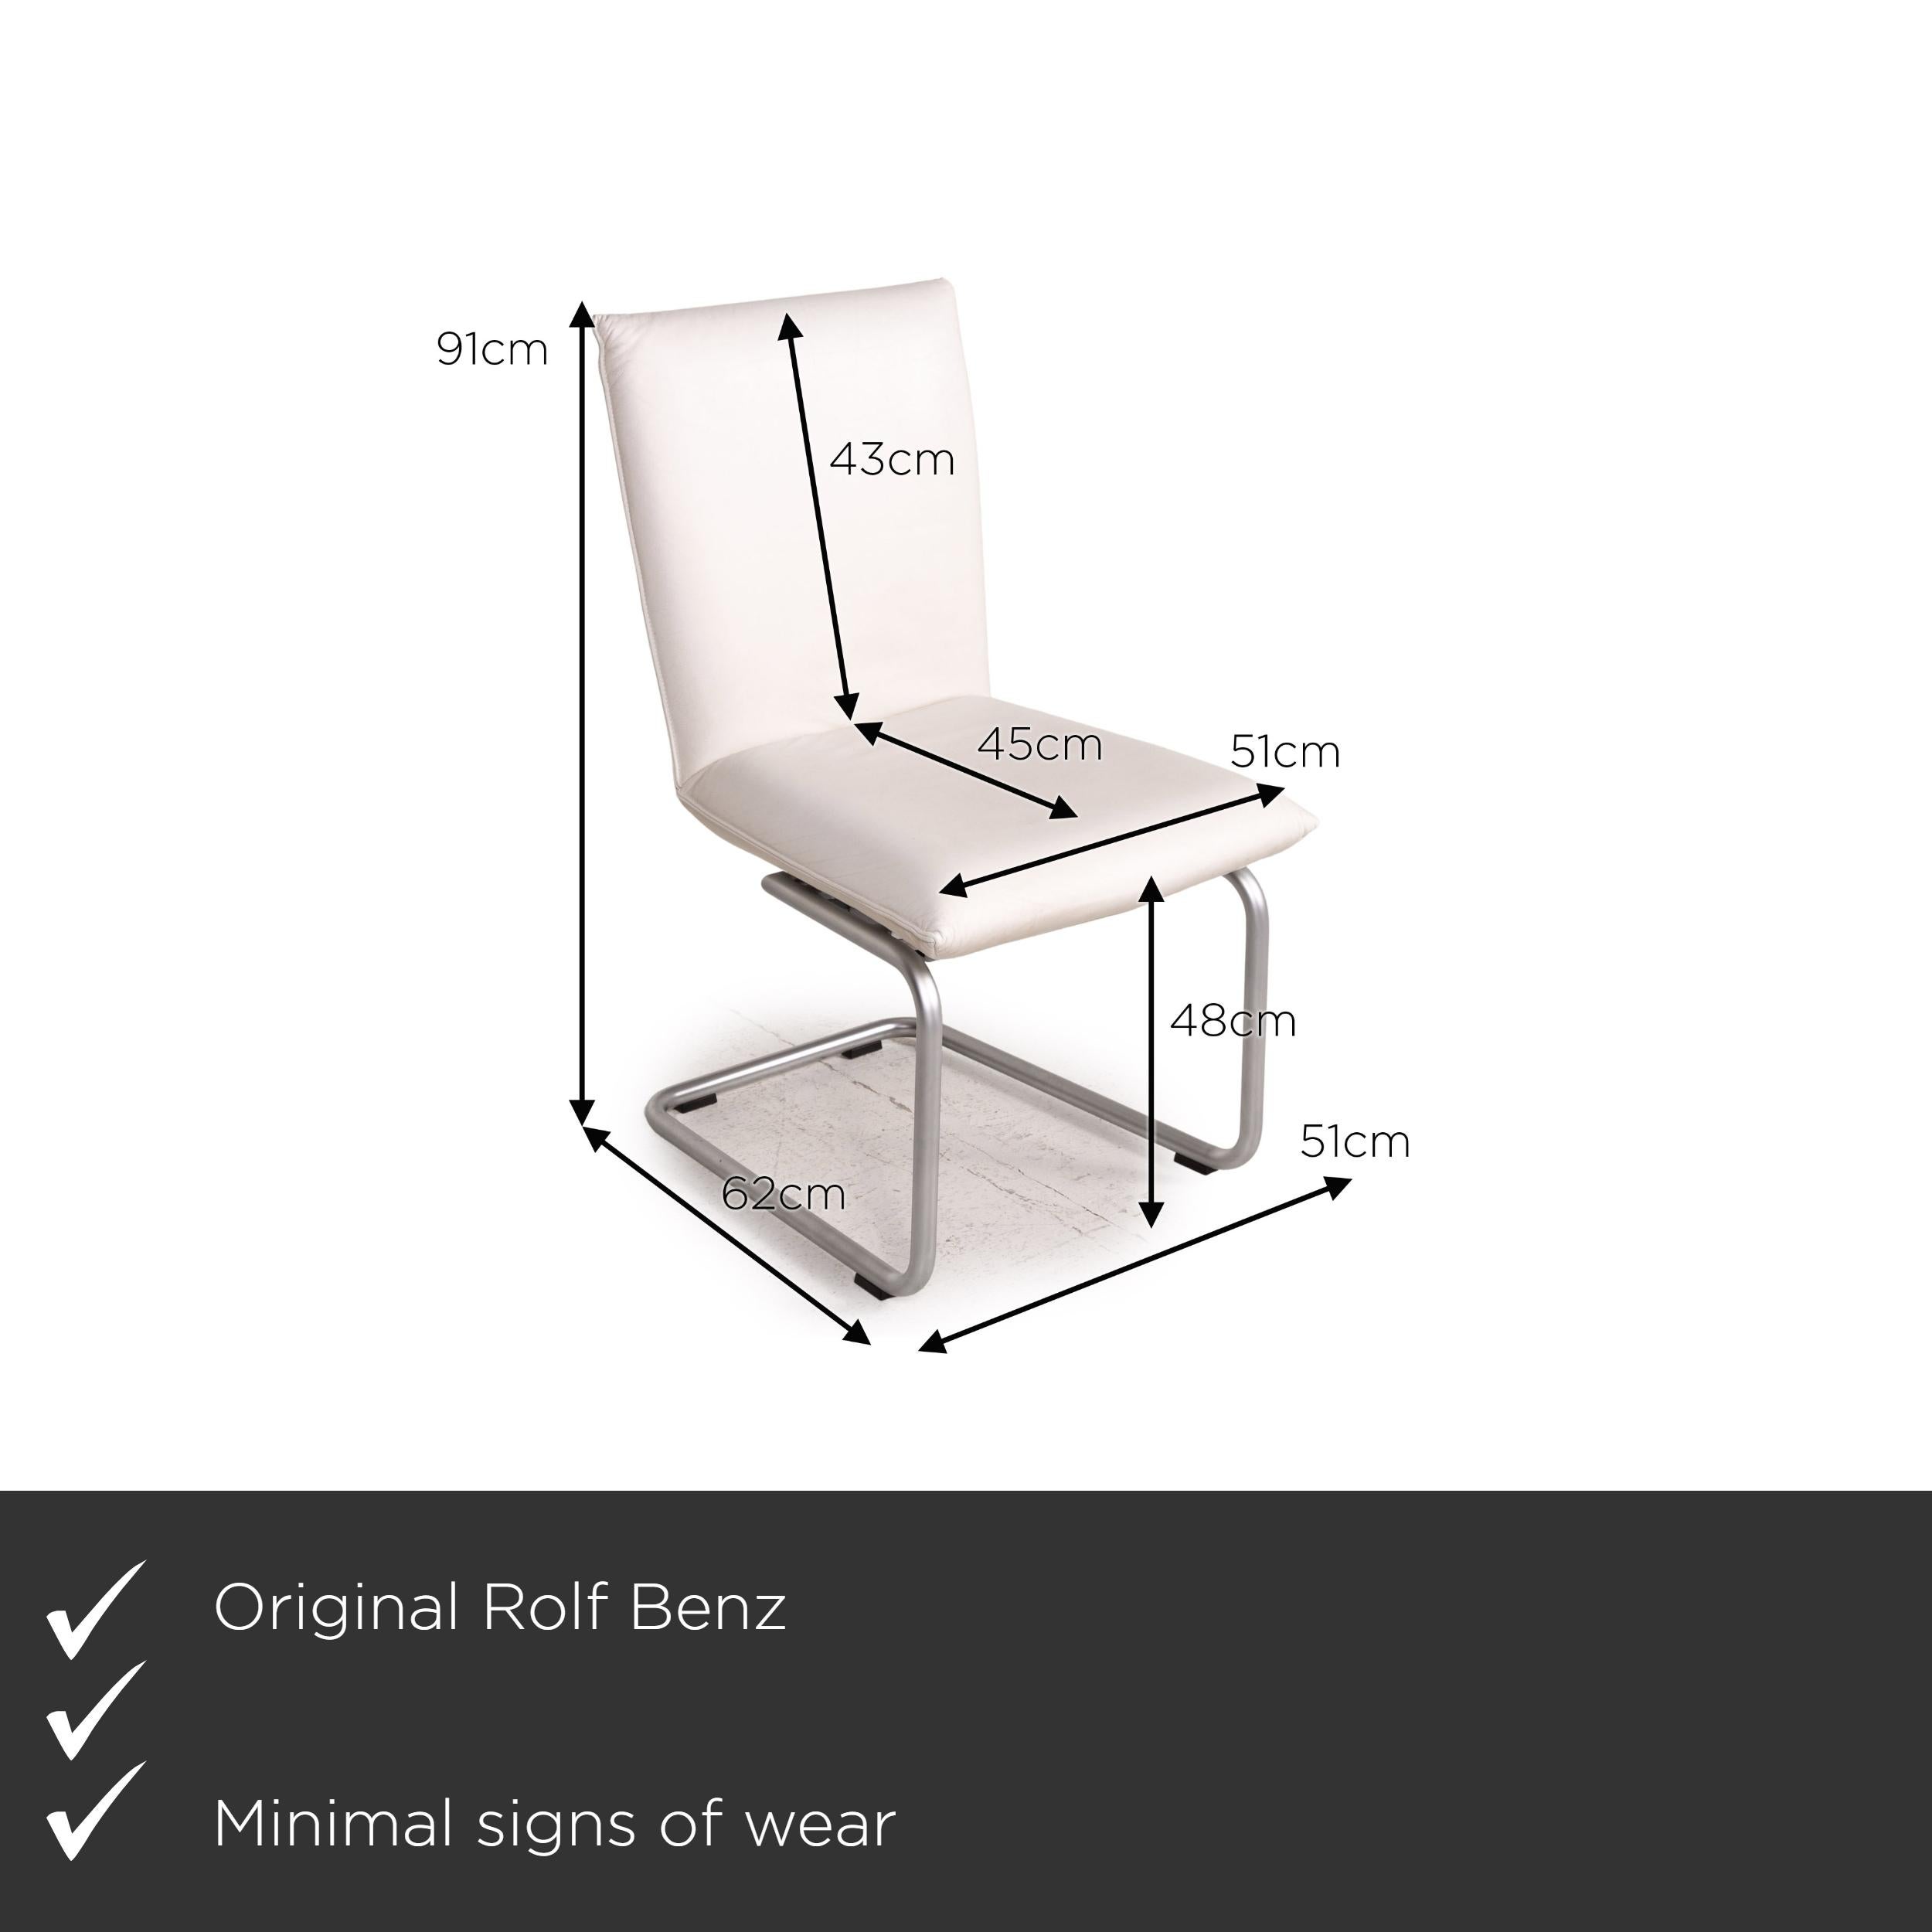 We present to you a Rolf Benz 620 leather chair cream cantilever.


 Product measurements in centimeters:
 

Depth: 62
Width: 51
Height: 91
Seat height: 48
Seat depth: 45
Seat width: 51
Back height: 43.

 